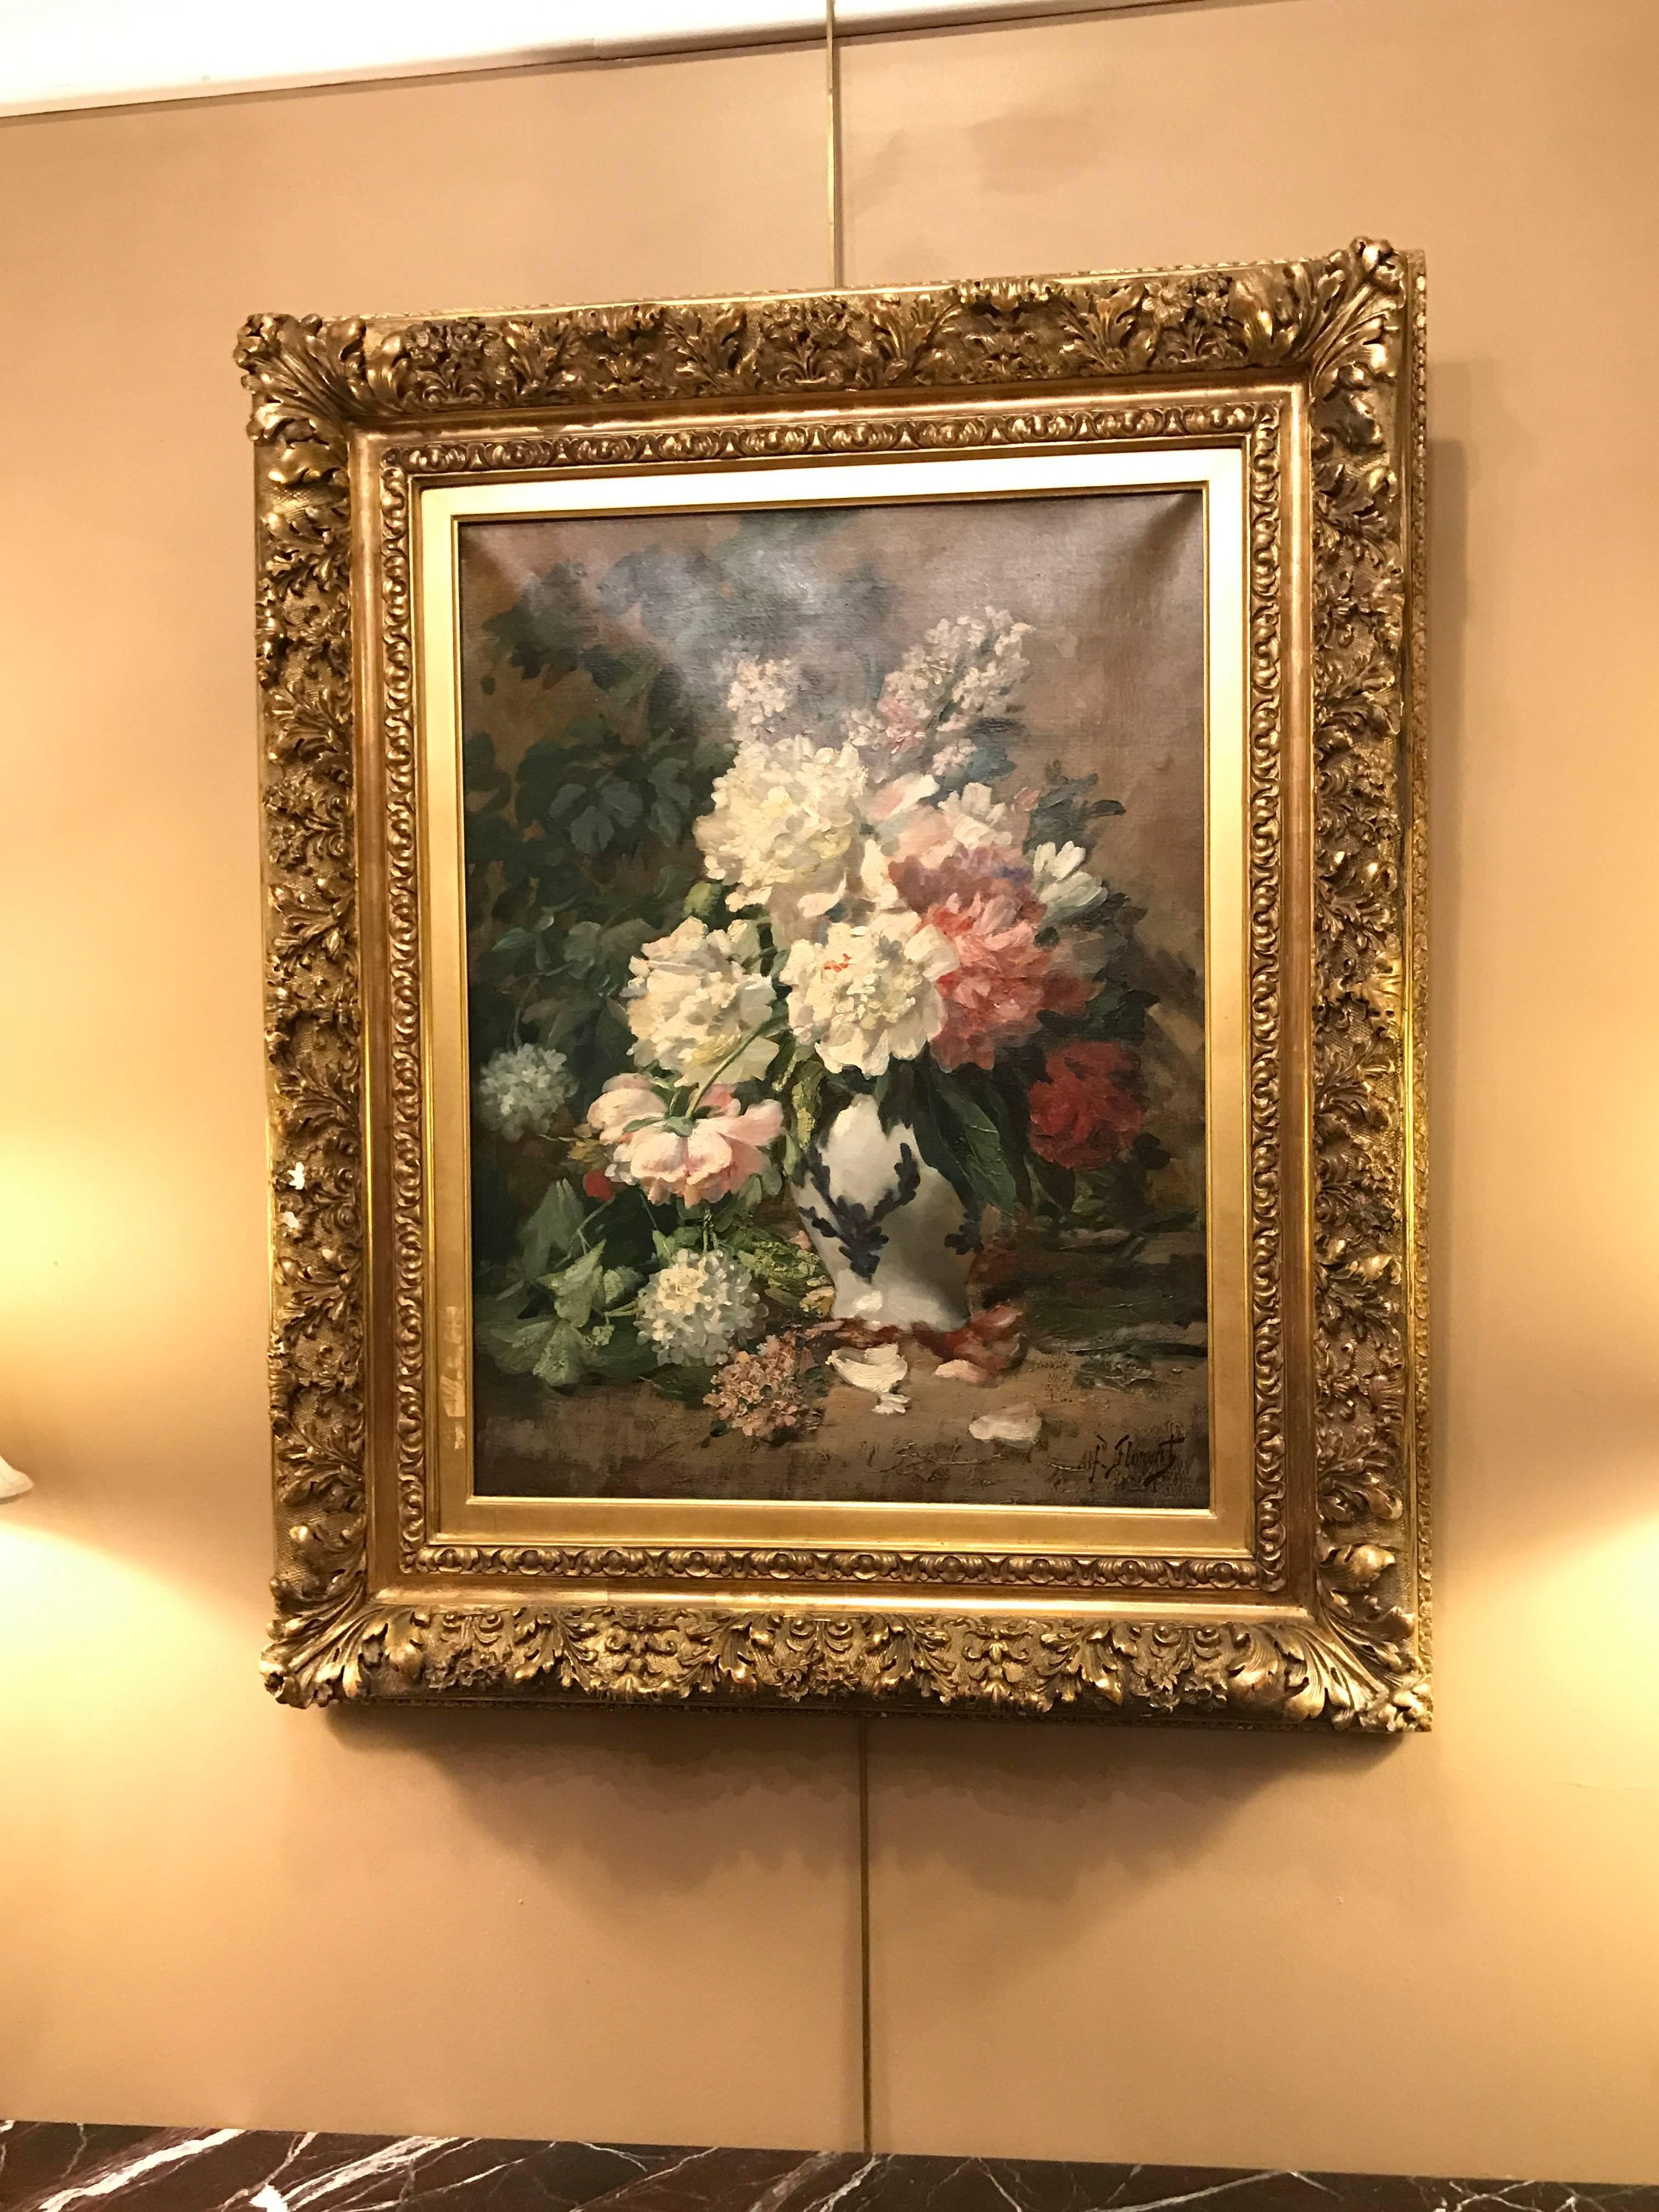 19th century French oil on canvas of a still-life of flowers in a white vase signed. This finely painted oil on canvas was done in the late 1800s and sits in a finely carved wood and gesso frame of floral design. The oil painting itself simply a